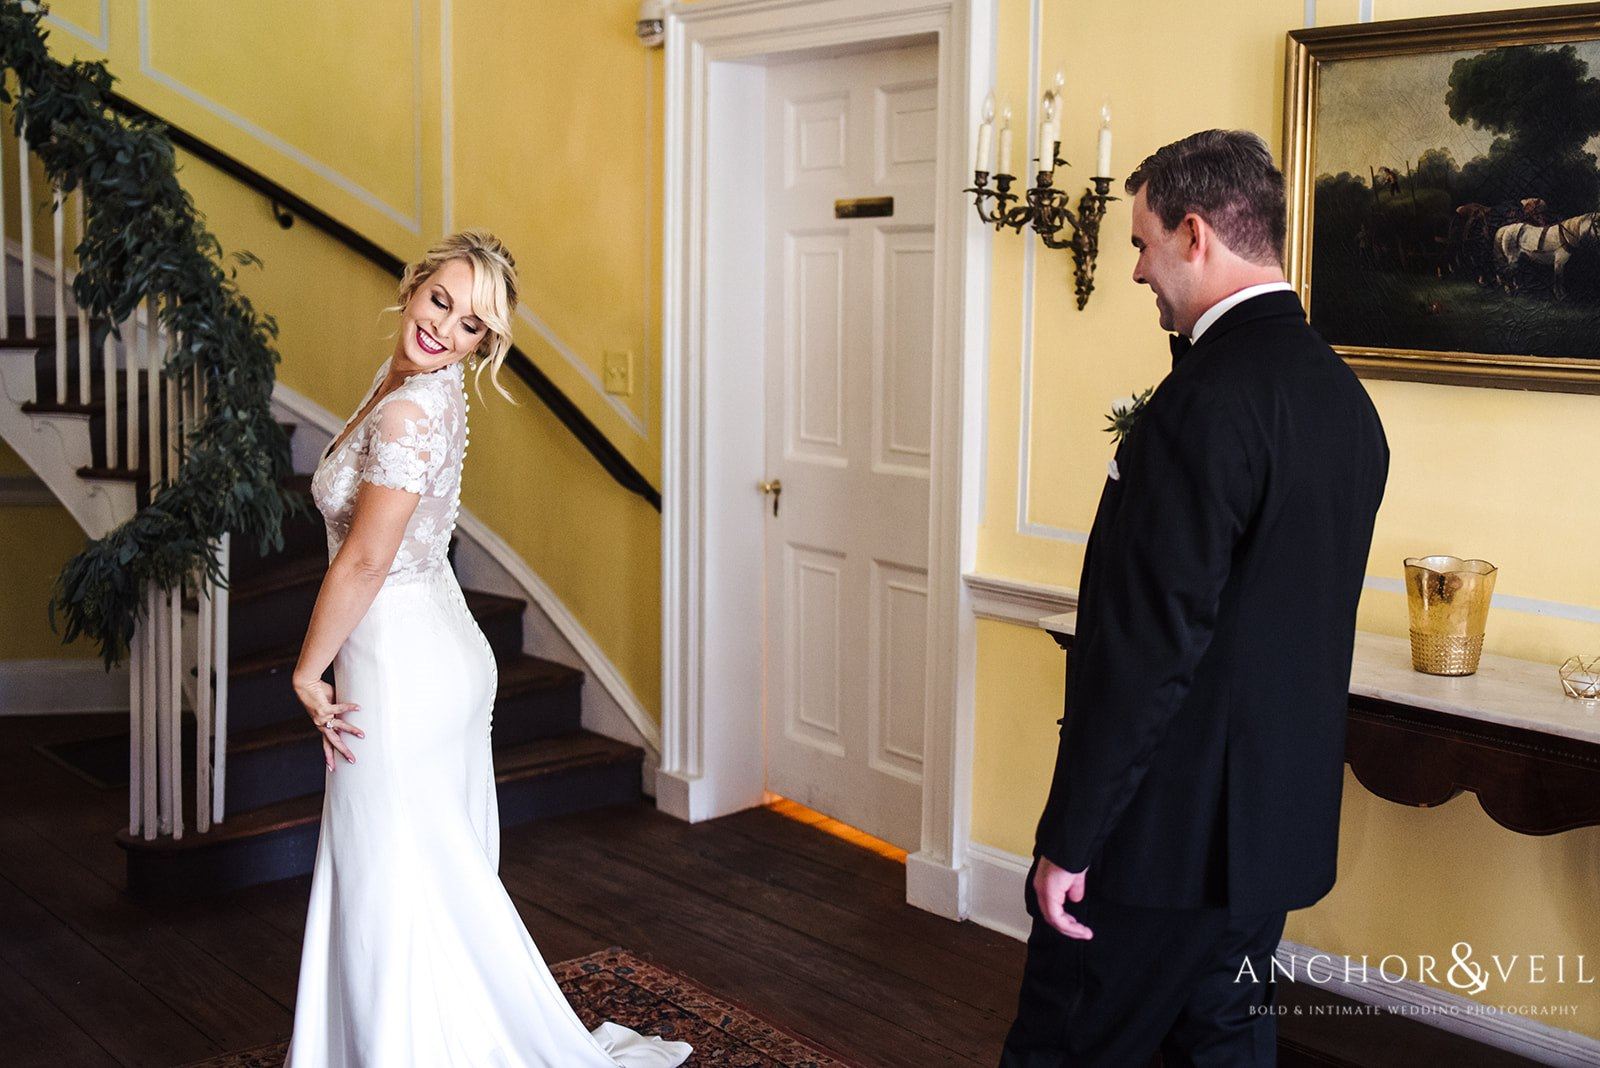 The groom admiring his bride in her dress at the Lowndes Grove Plantation Wedding